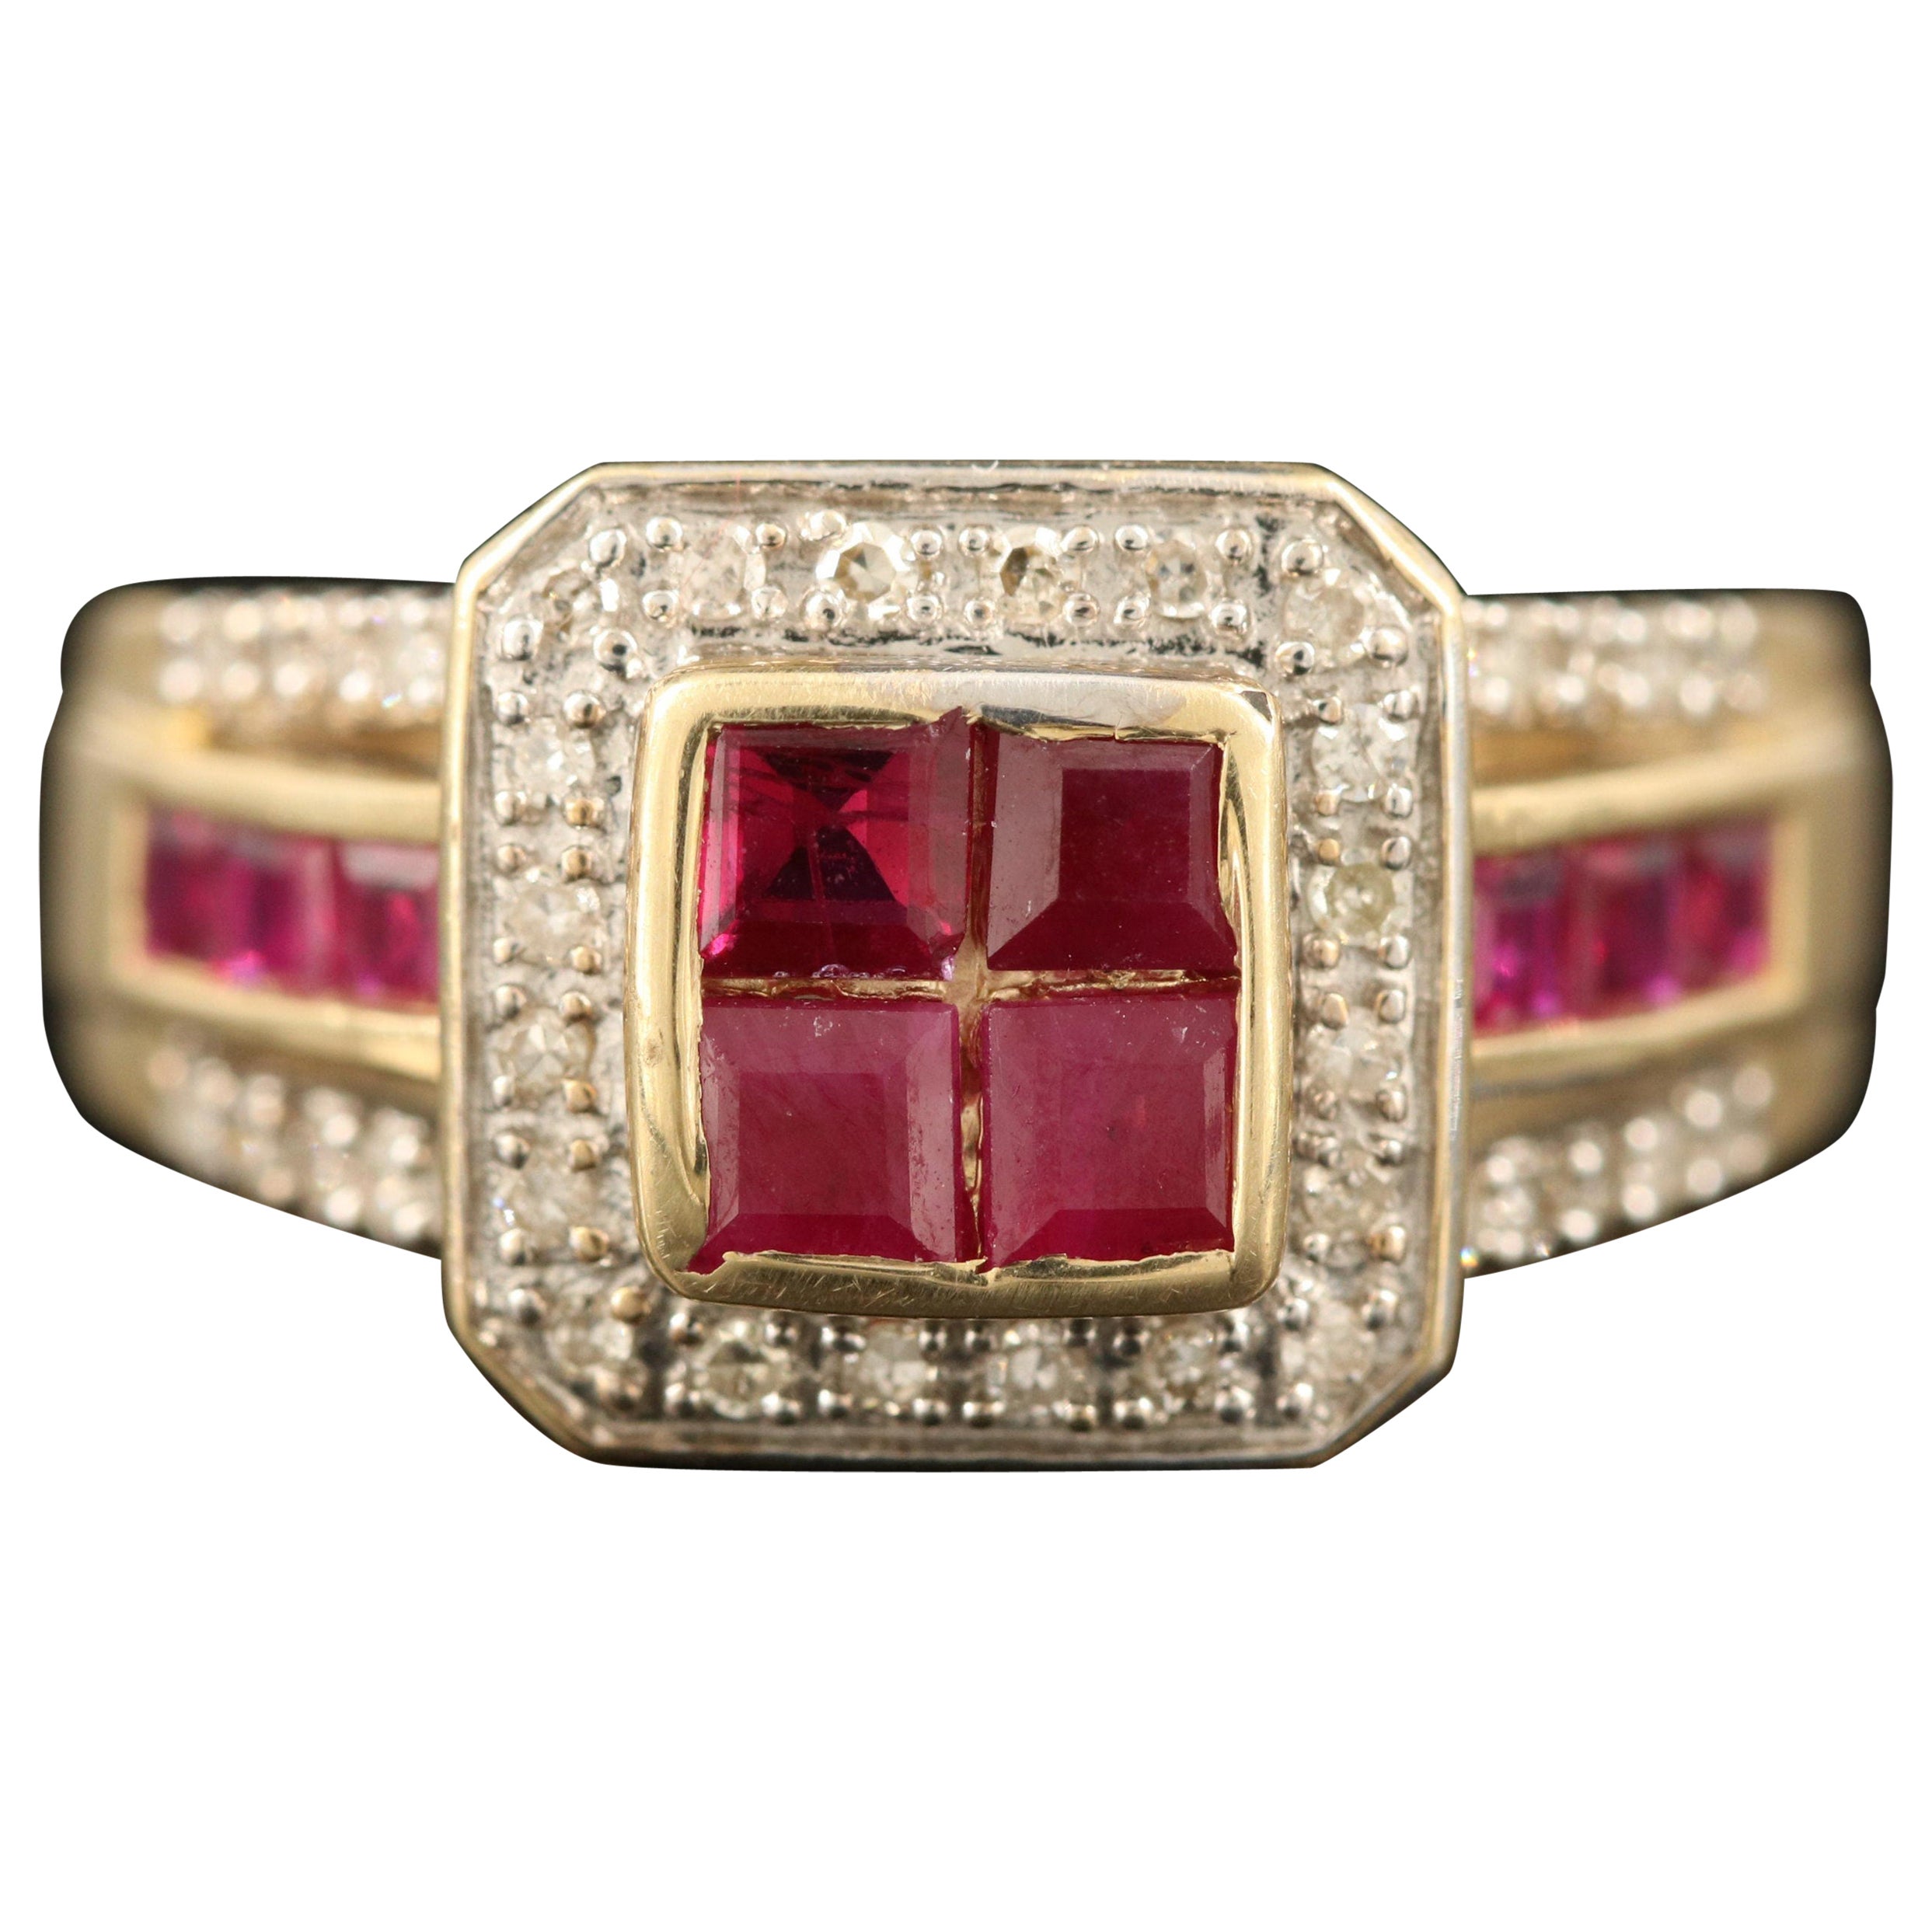 Art Deco Natural Ruby Diamond Engagement Ring Set in 18K Gold, Cocktail Ring